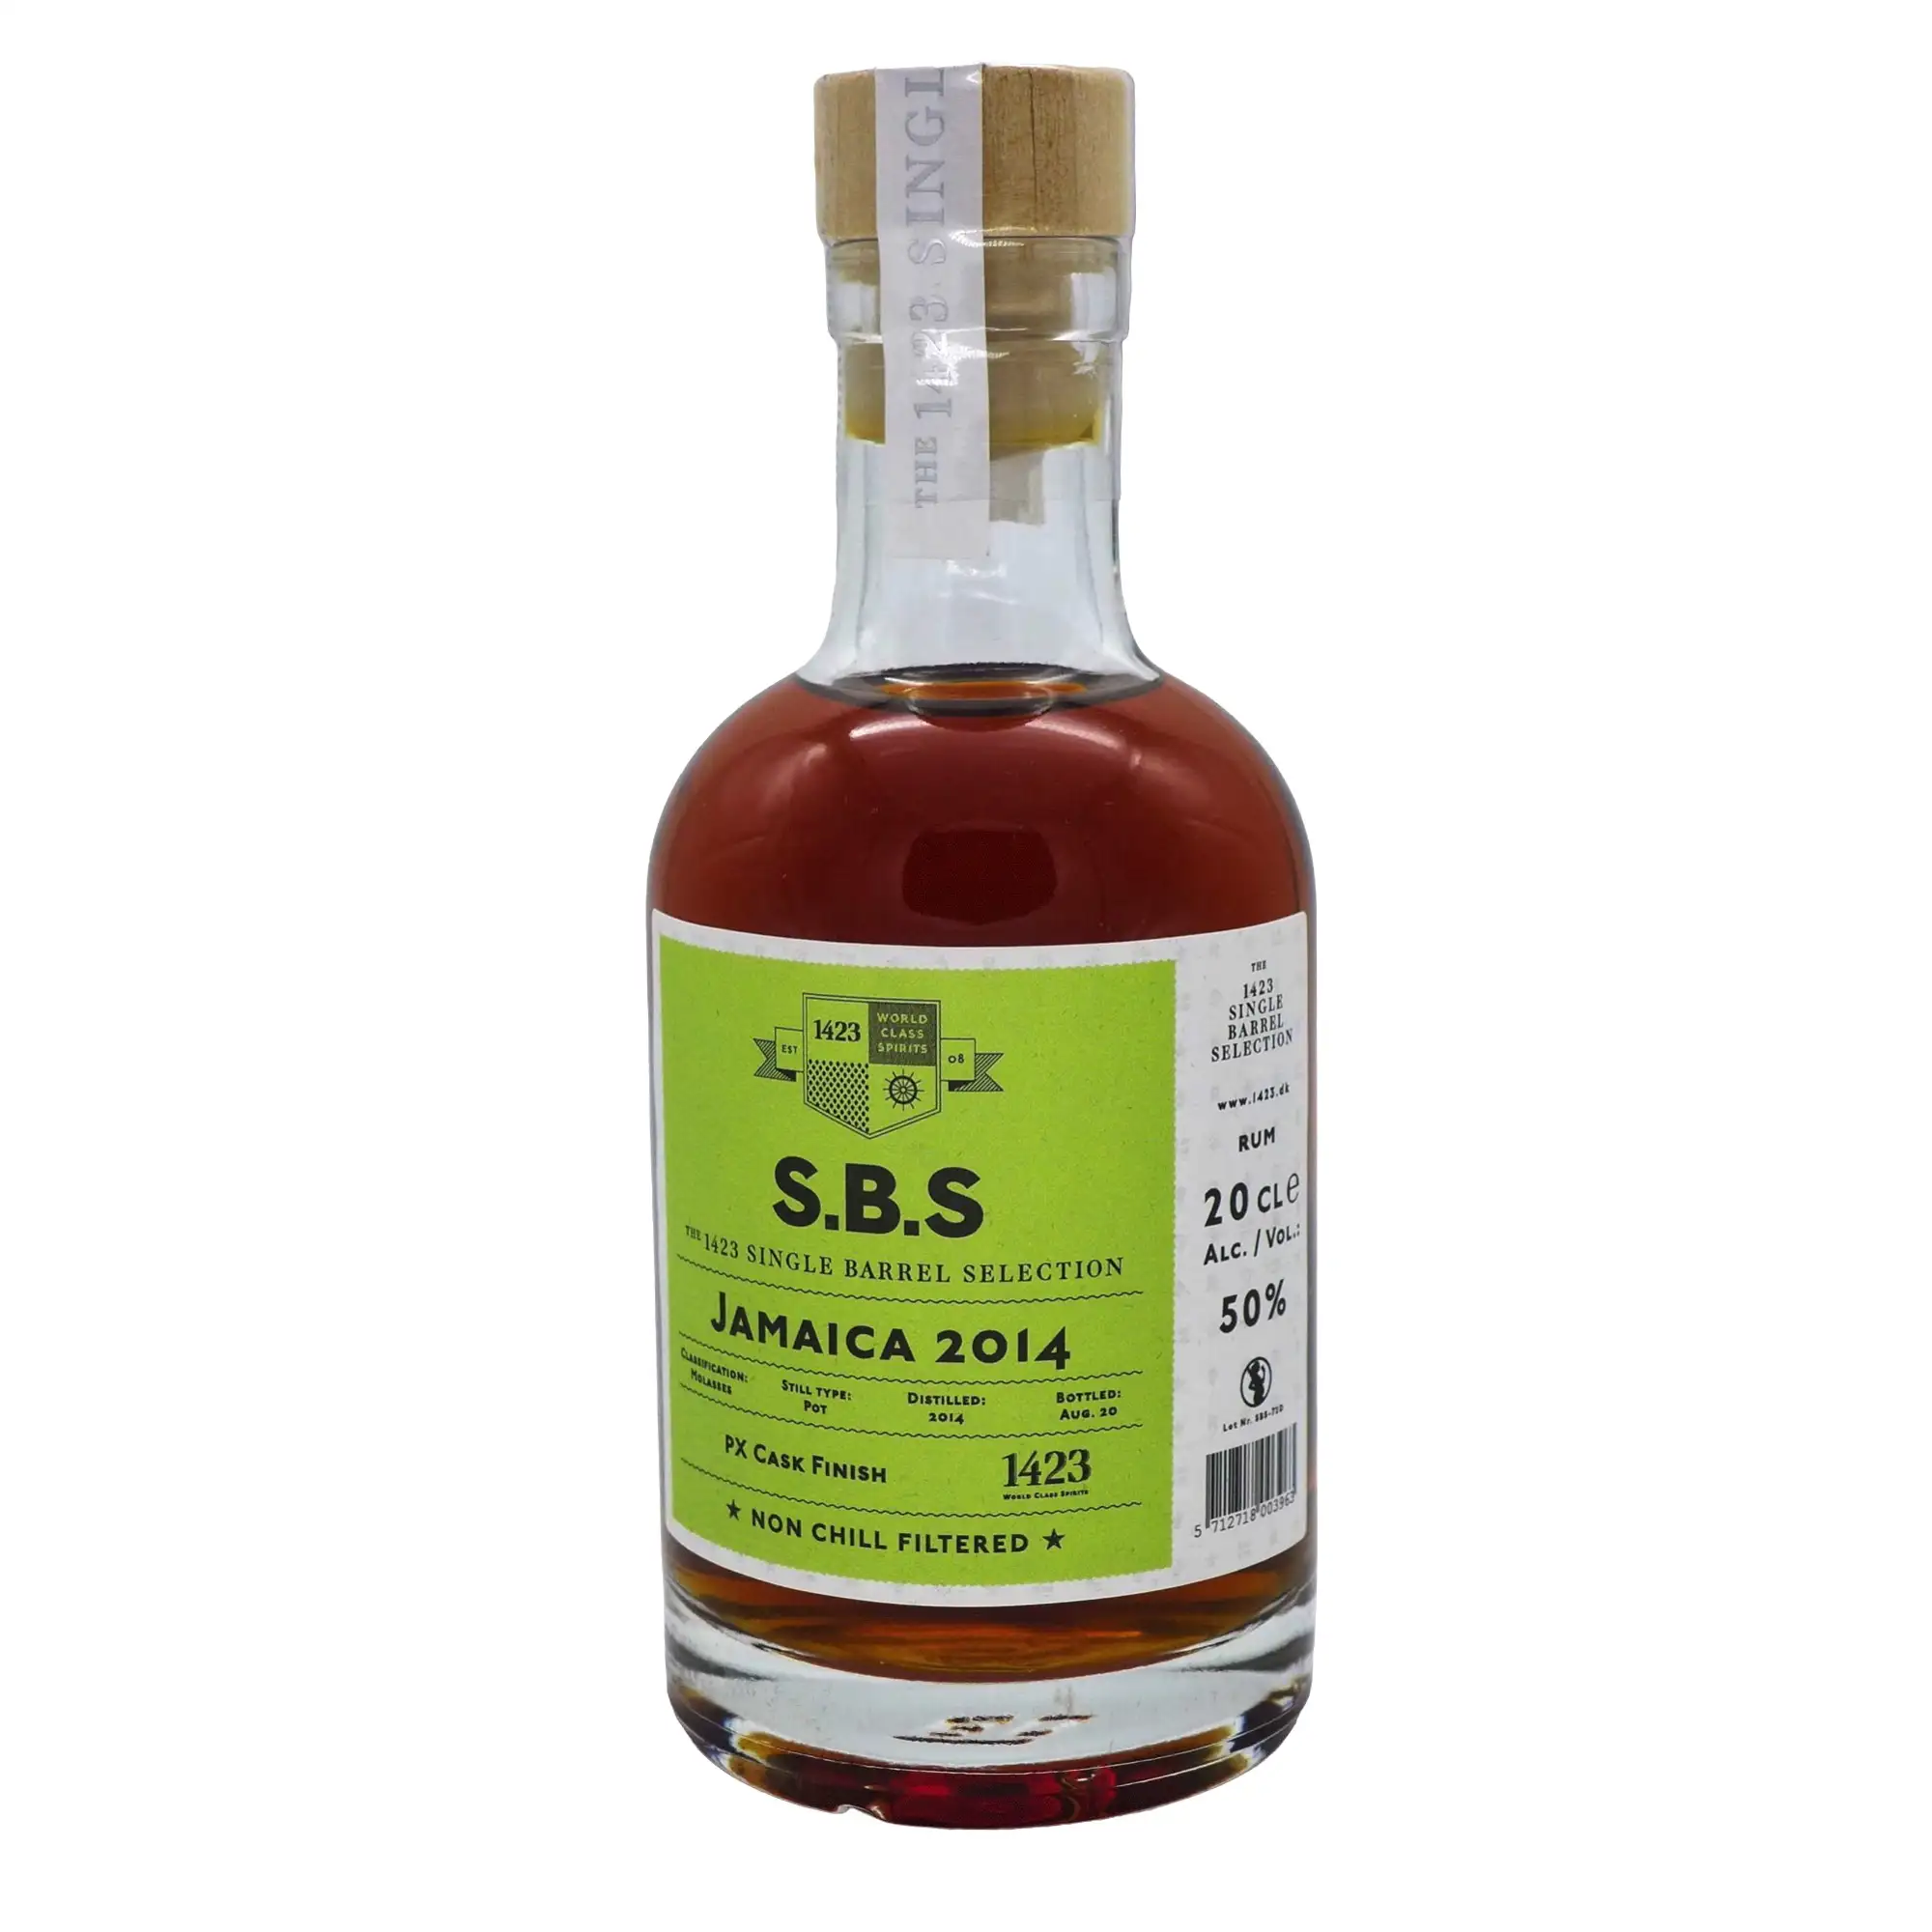 Image of the front of the bottle of the rum S.B.S Jamaica PX Cask Finish